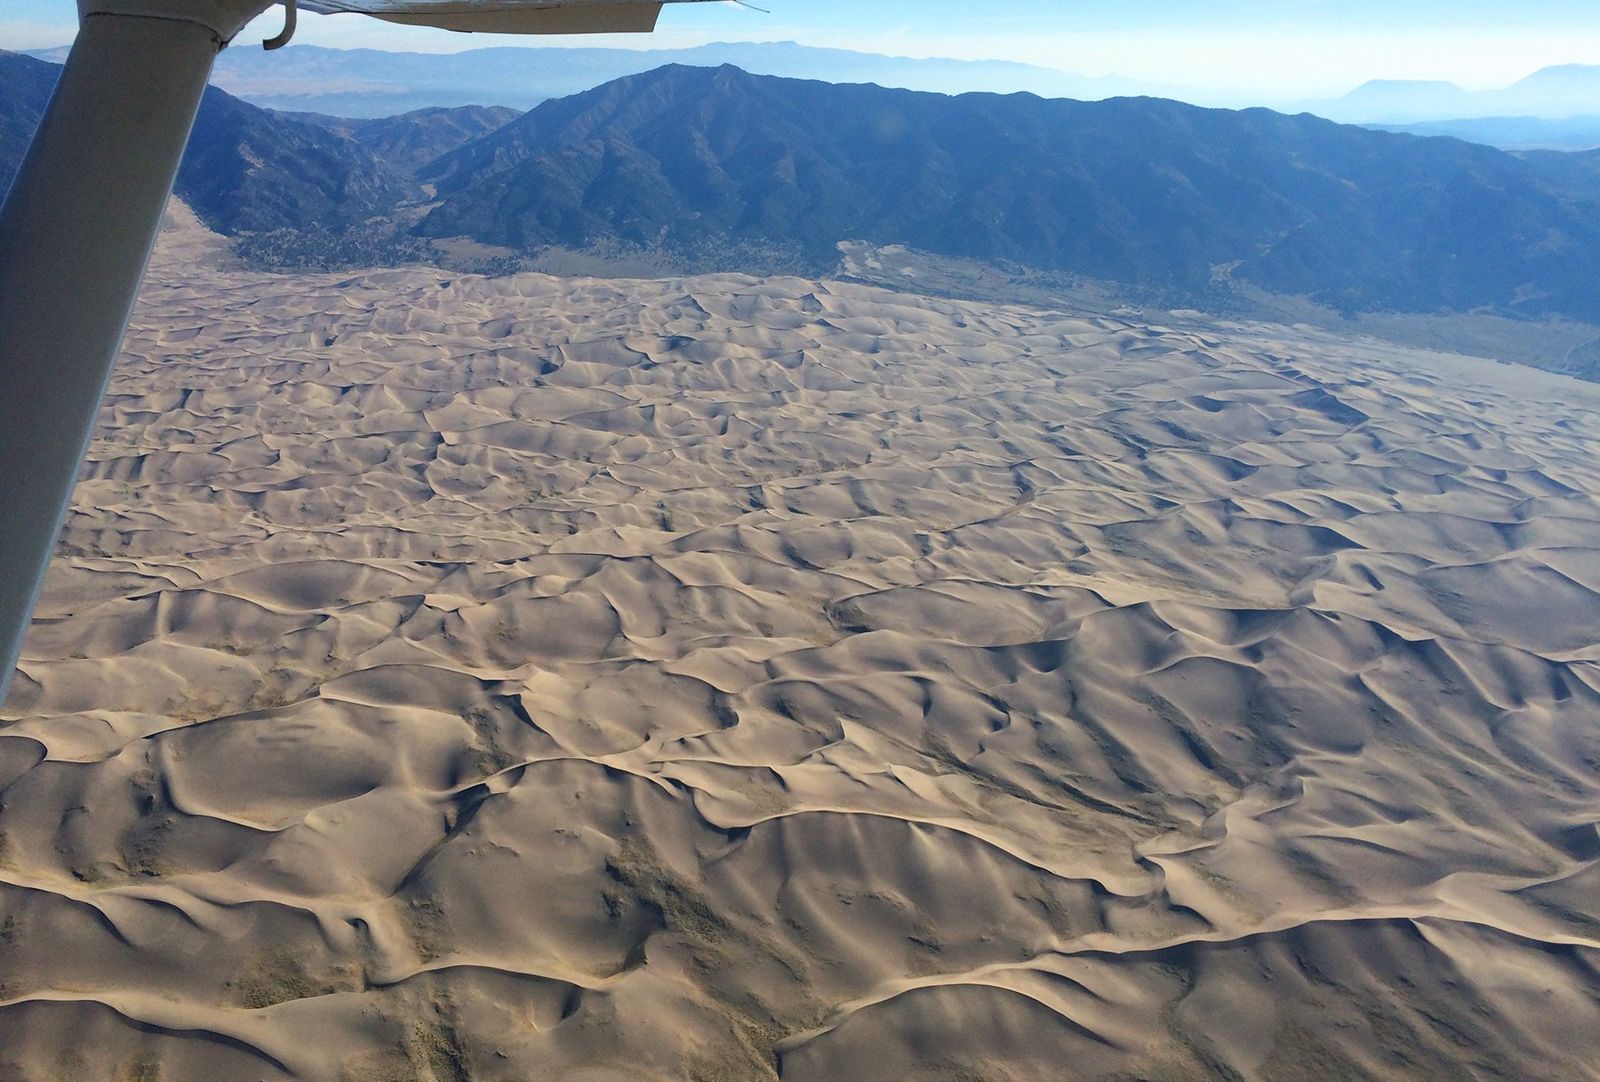 Aerial view of the Great Sand Dunes